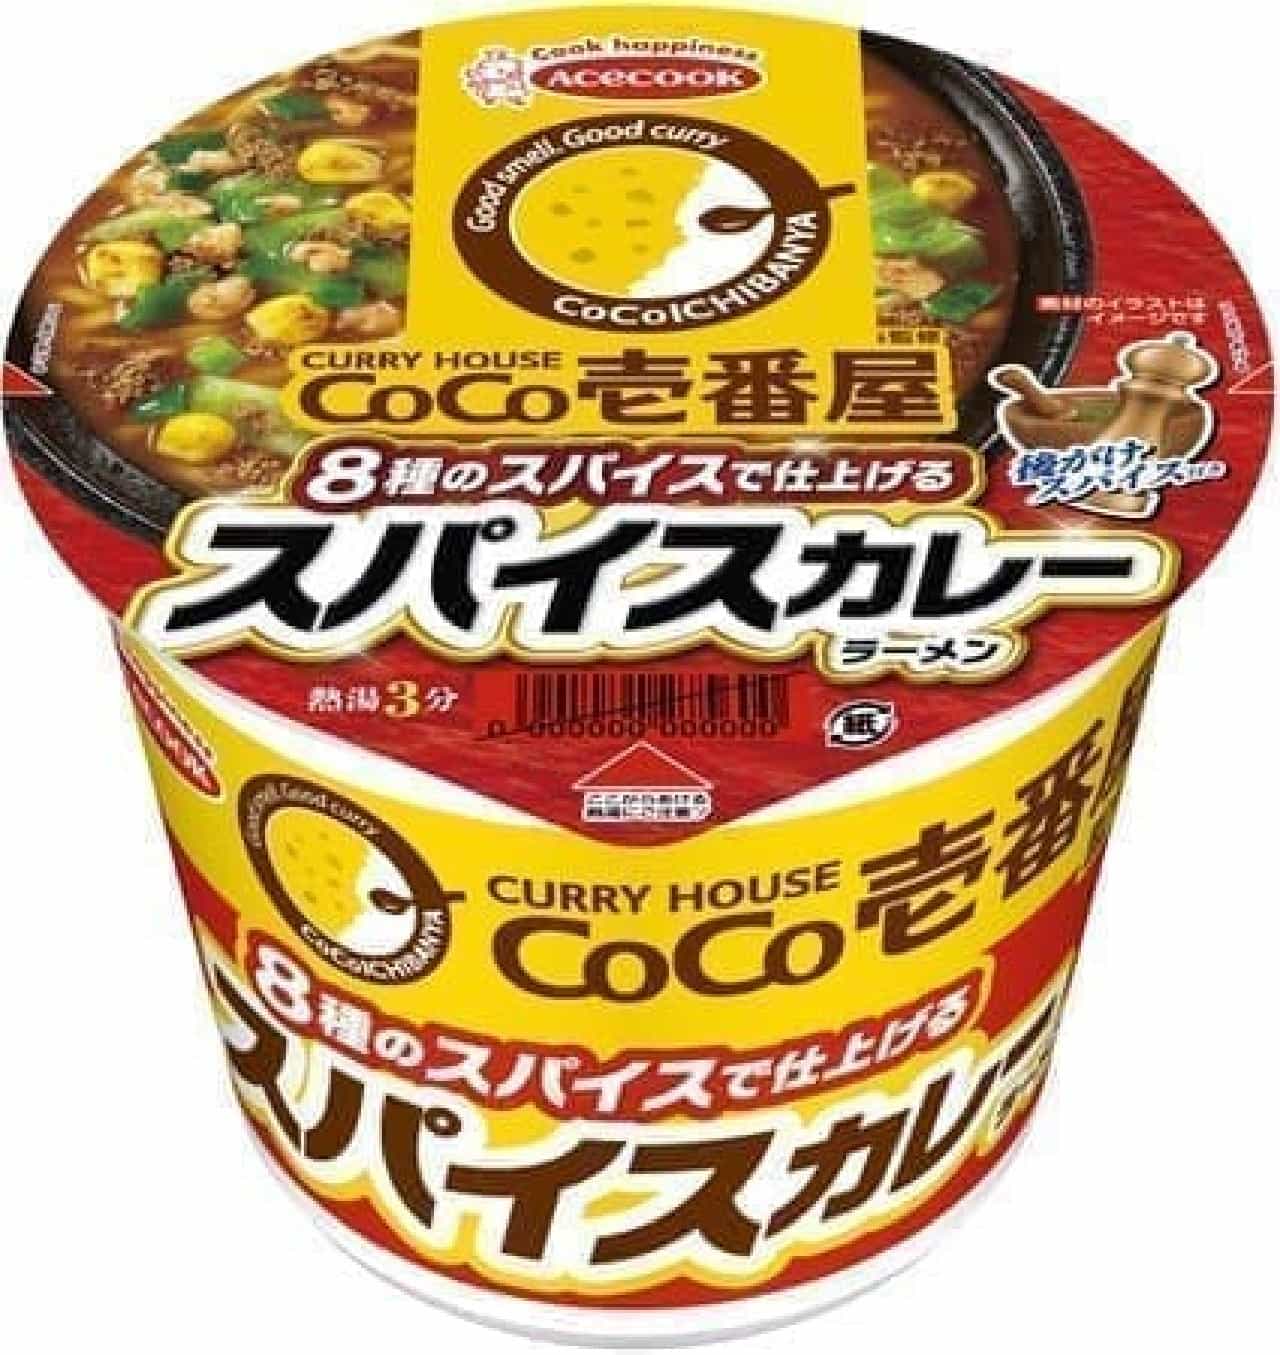 Supervised by CoCo Ichibanya Spice Curry Ramen